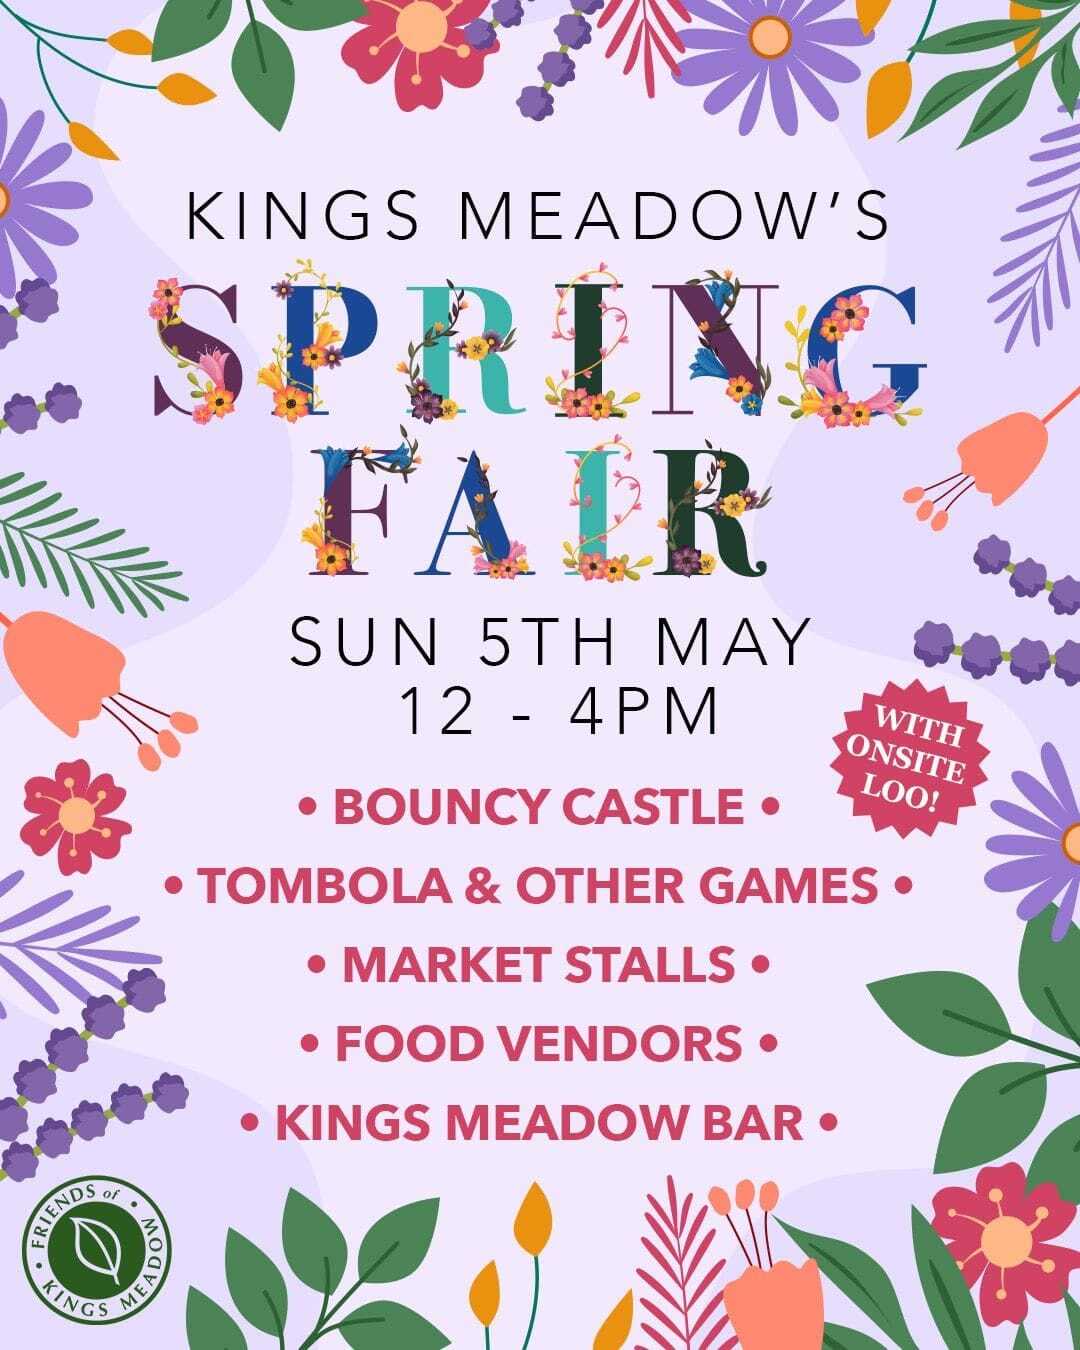 King's Meadows Spring Fair event flyer image with black and pink text surrounded by flowers (image text on page)